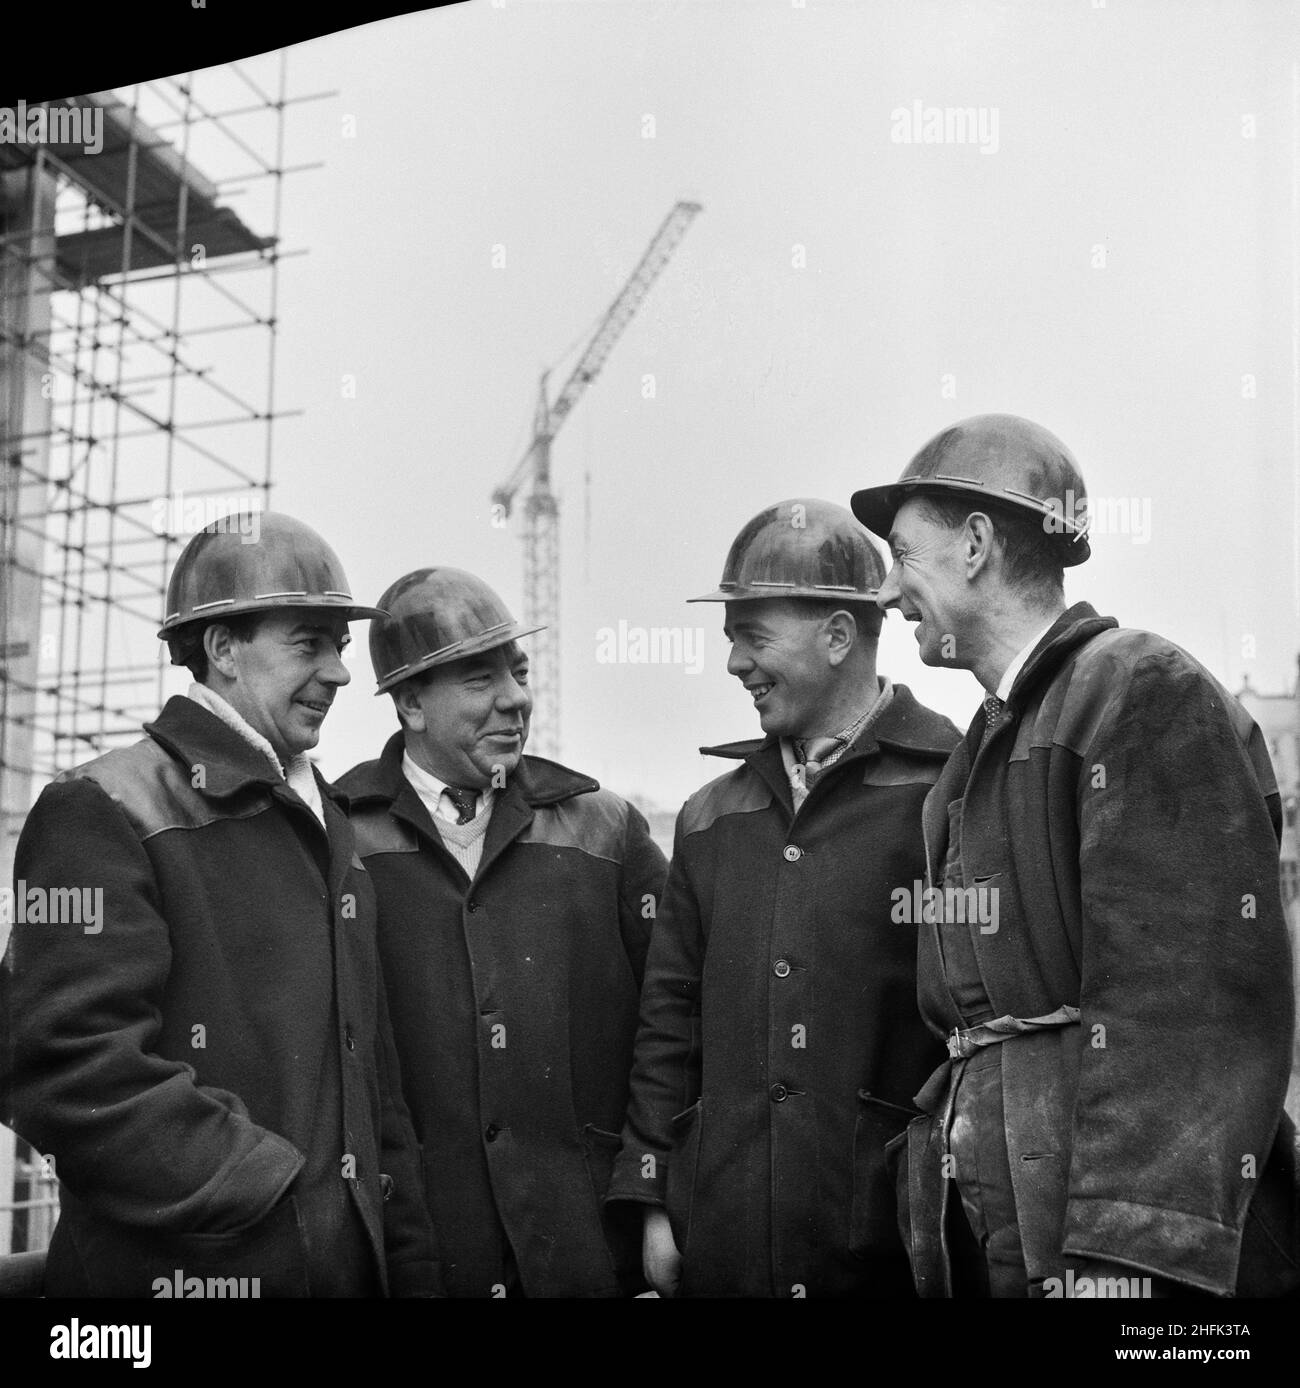 Paternoster Square, City of London, 15/01/1963. Four workmen employed on the construction of the Paternoster development. Photographs of these four workers were published in the February 1963 issue of Laing's monthly newsletter, Team Spirit. From left to right: G Otley, concreting ganger; J White, foreman joiner; P Enright, walking ganger; R Coxhead, carpenter/joiner.Work on the Paternoster development was carried out in a joint venture by John Laing Construction Limited, Trollope and Colls Limited, and George Wimpey and Company Limited. The scheme involved the redevelopment of a seven acre si Stock Photo